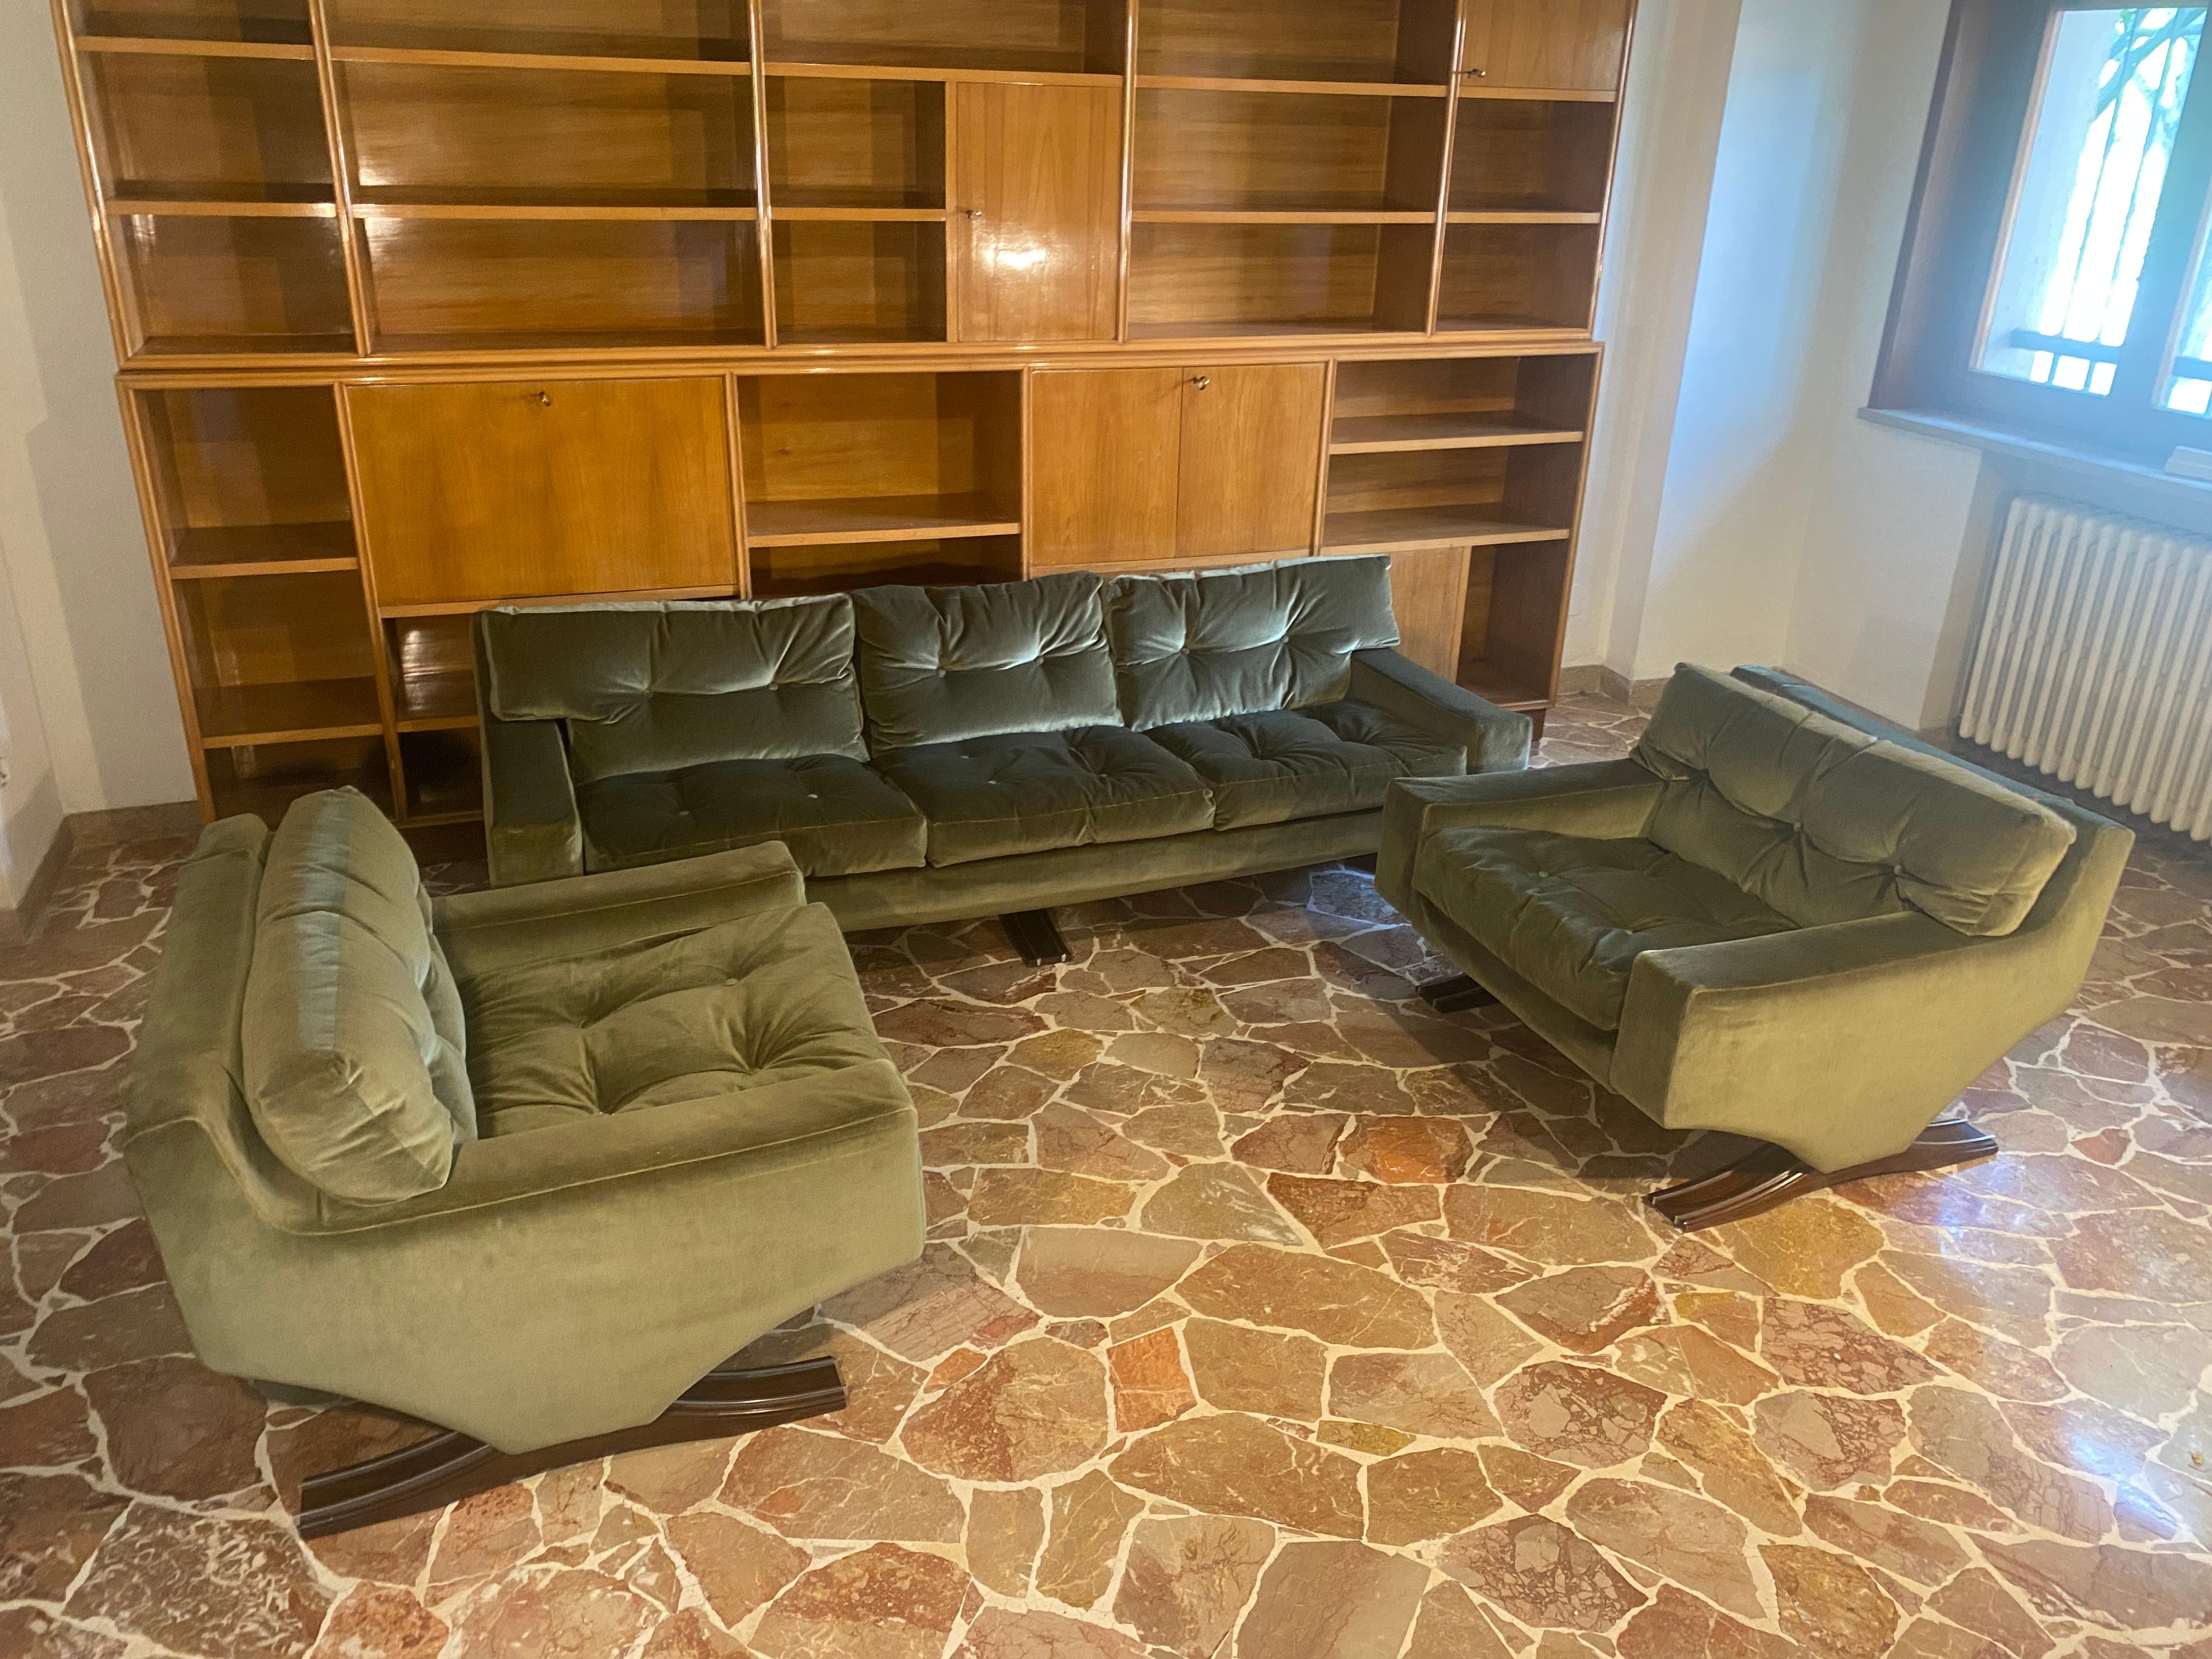 Stunning three-seat sofa in green velvet by the Italian sculptor Franz Sartori. This sofa features a modern design due to the straight lines. Its wonderful shaped line, along with the original geometric design of the sides, is characteristic of